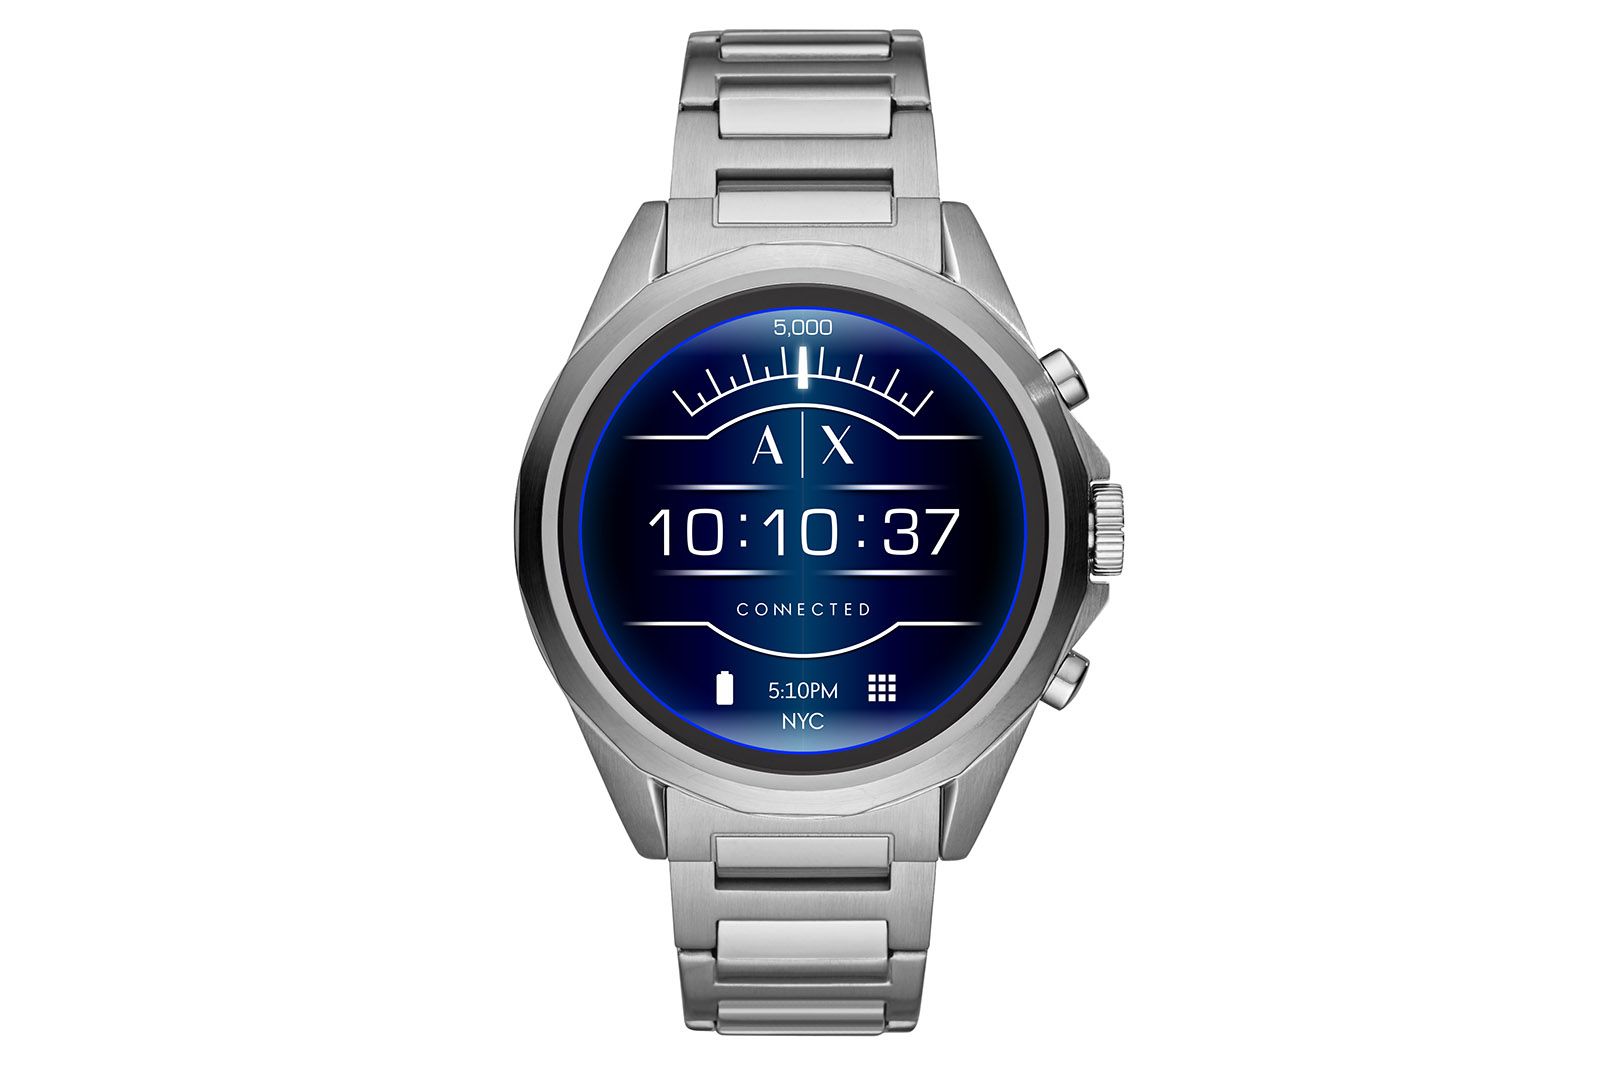 AIX Armani Exchange Connected Wear OS built to impress image 1